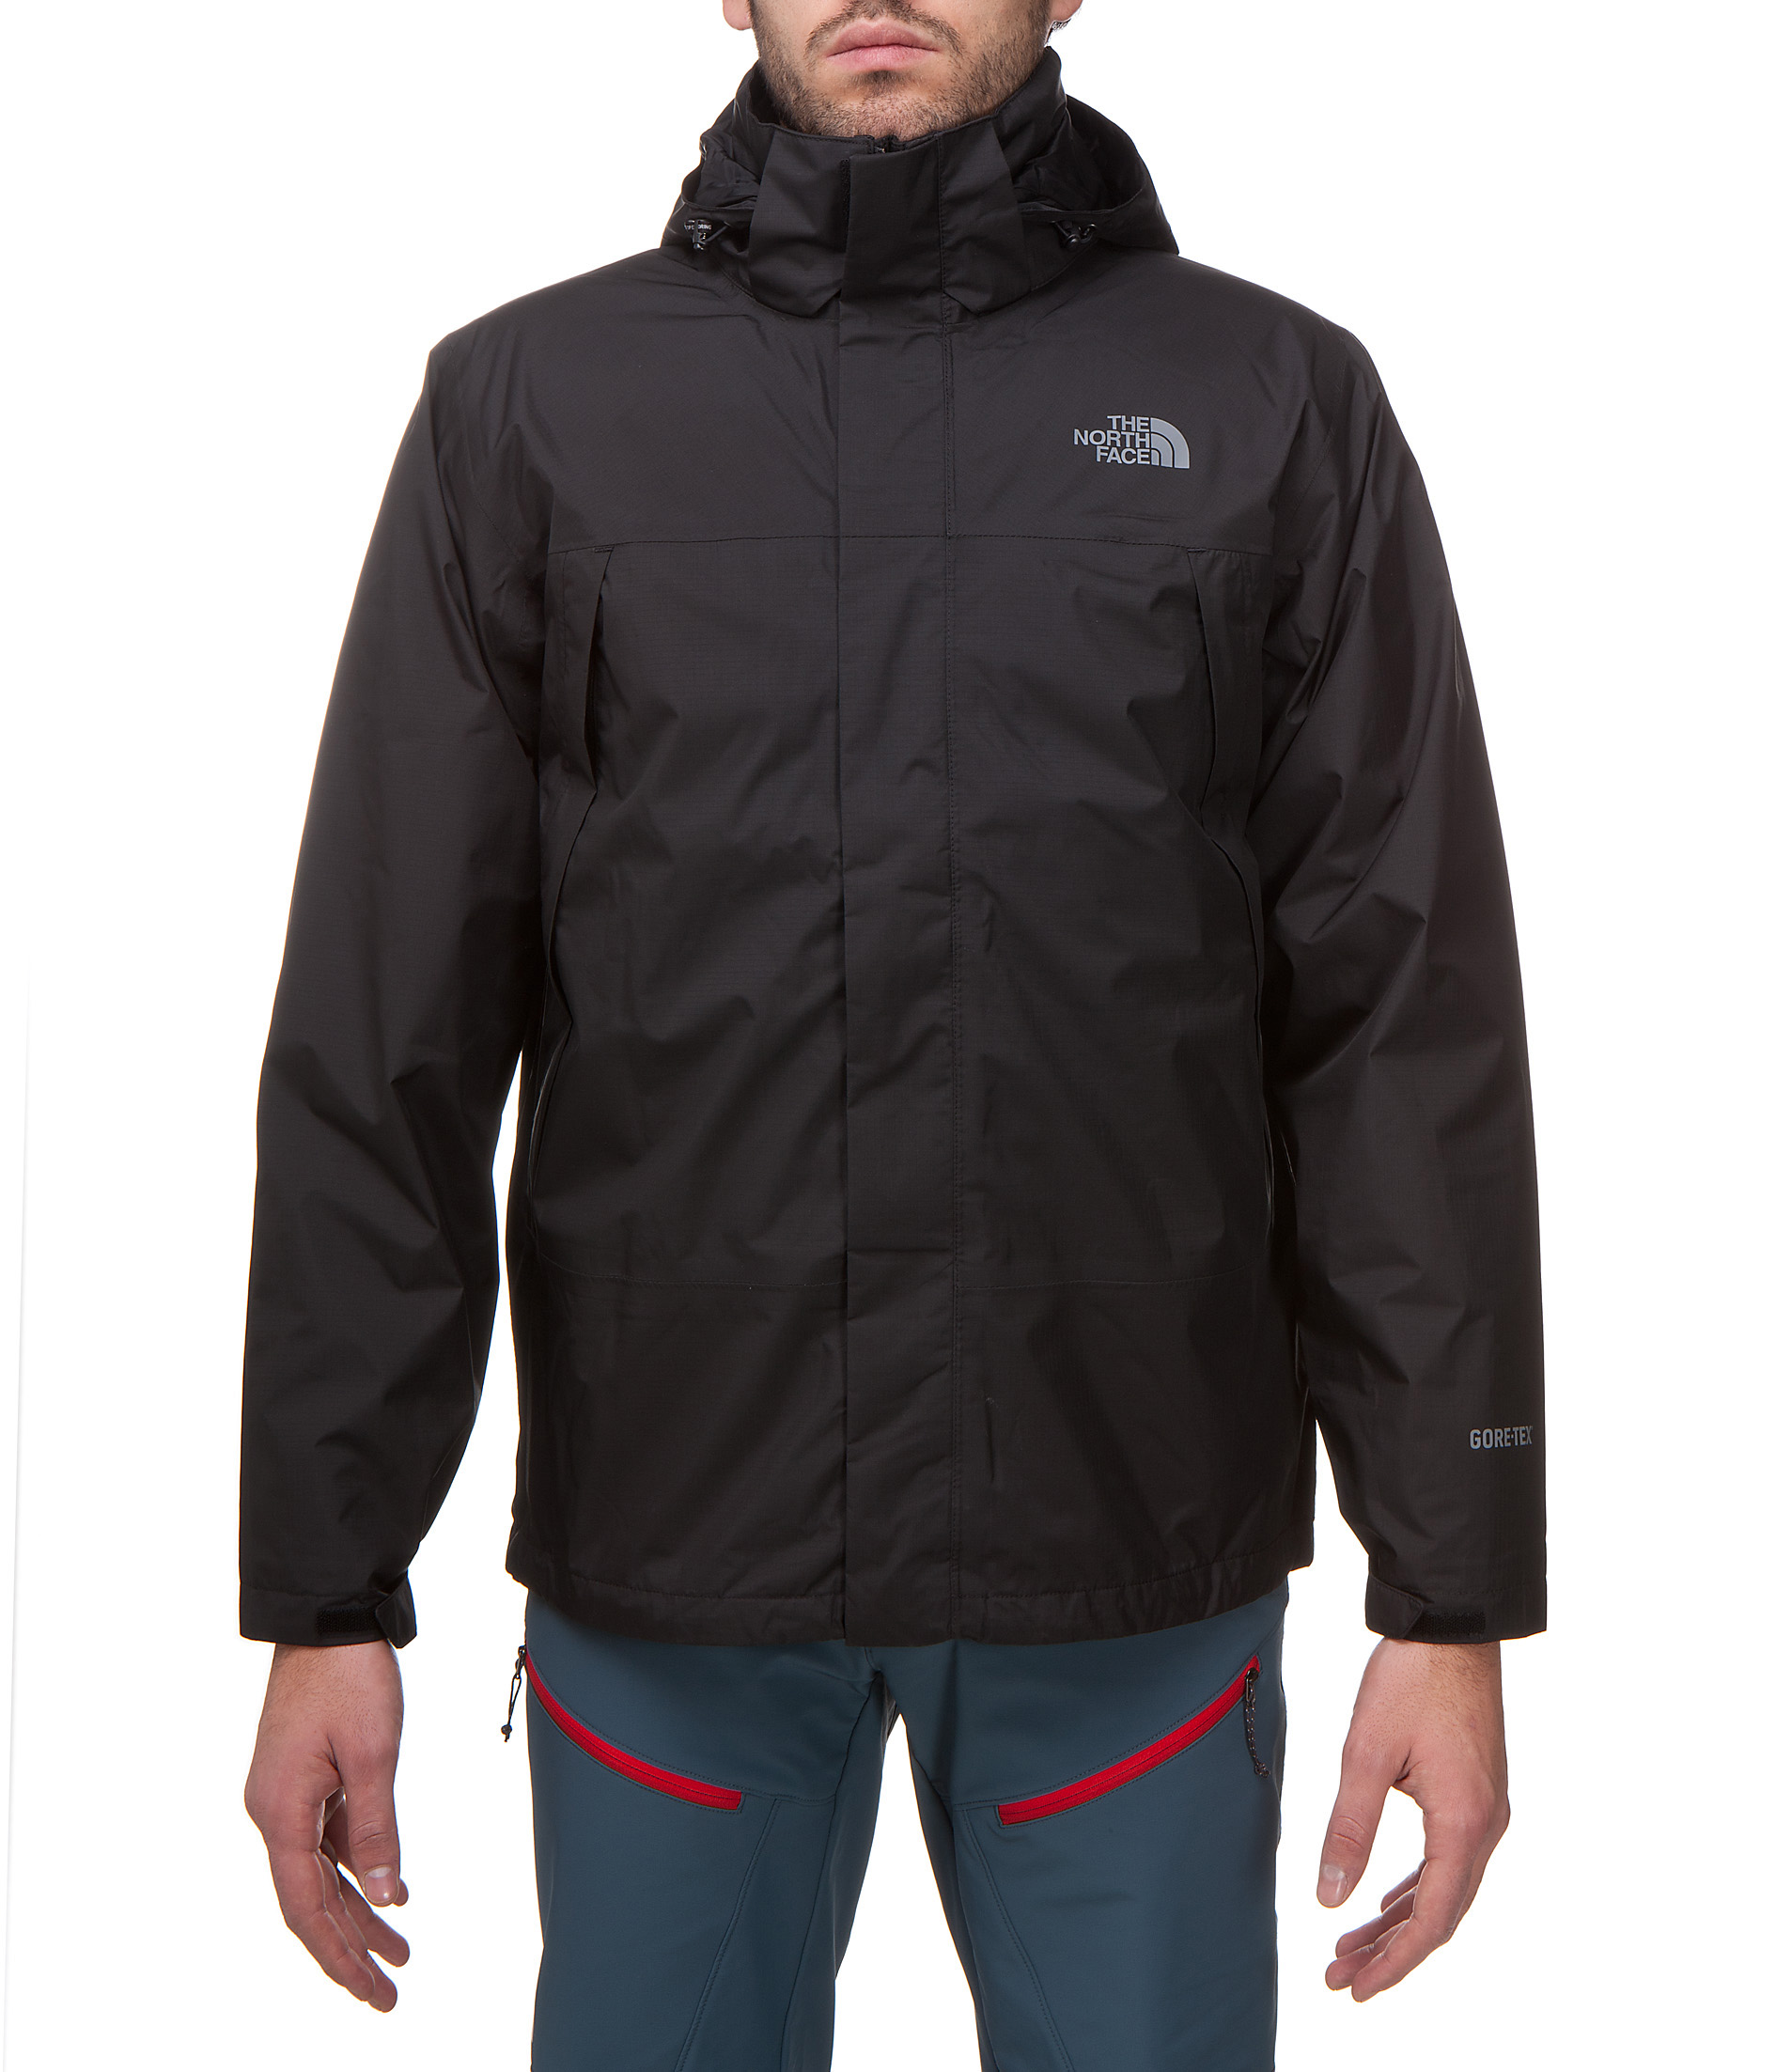 Foto The North Face Men's Mountain Light Triclimate™ Jacket foto 200290